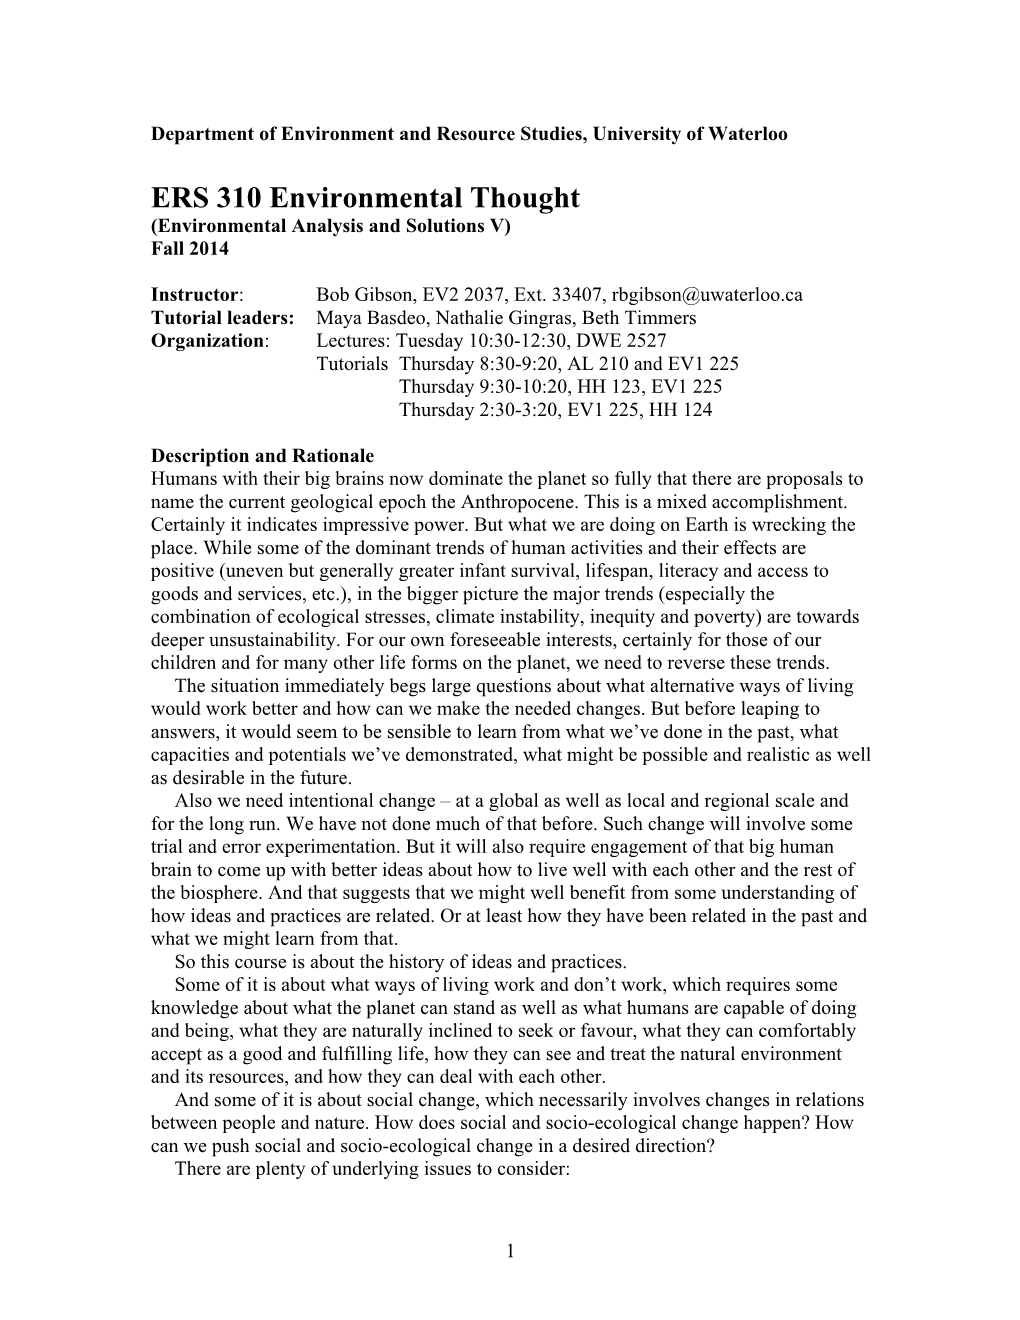 ERS 310 Environmental Thought (Environmental Analysis and Solutions V) Fall 2014